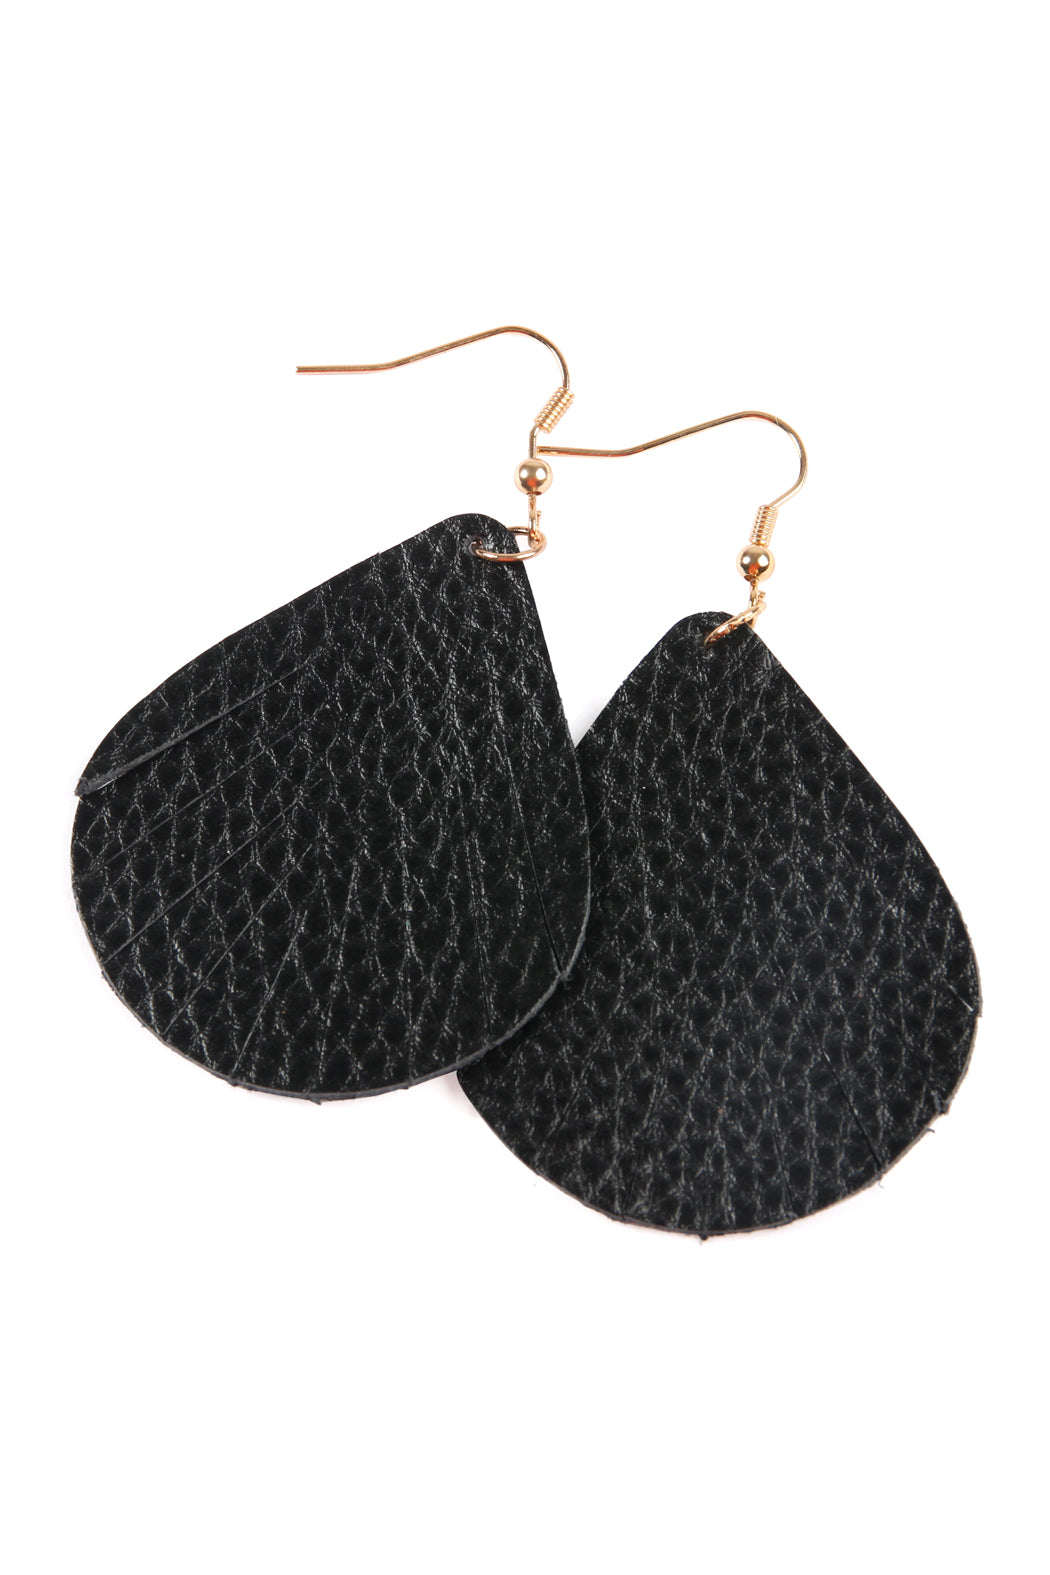 FRINGED PEAR SHAPE LEATHER EARRINGS/6PAIRS (NOW $1.25 ONLY!)